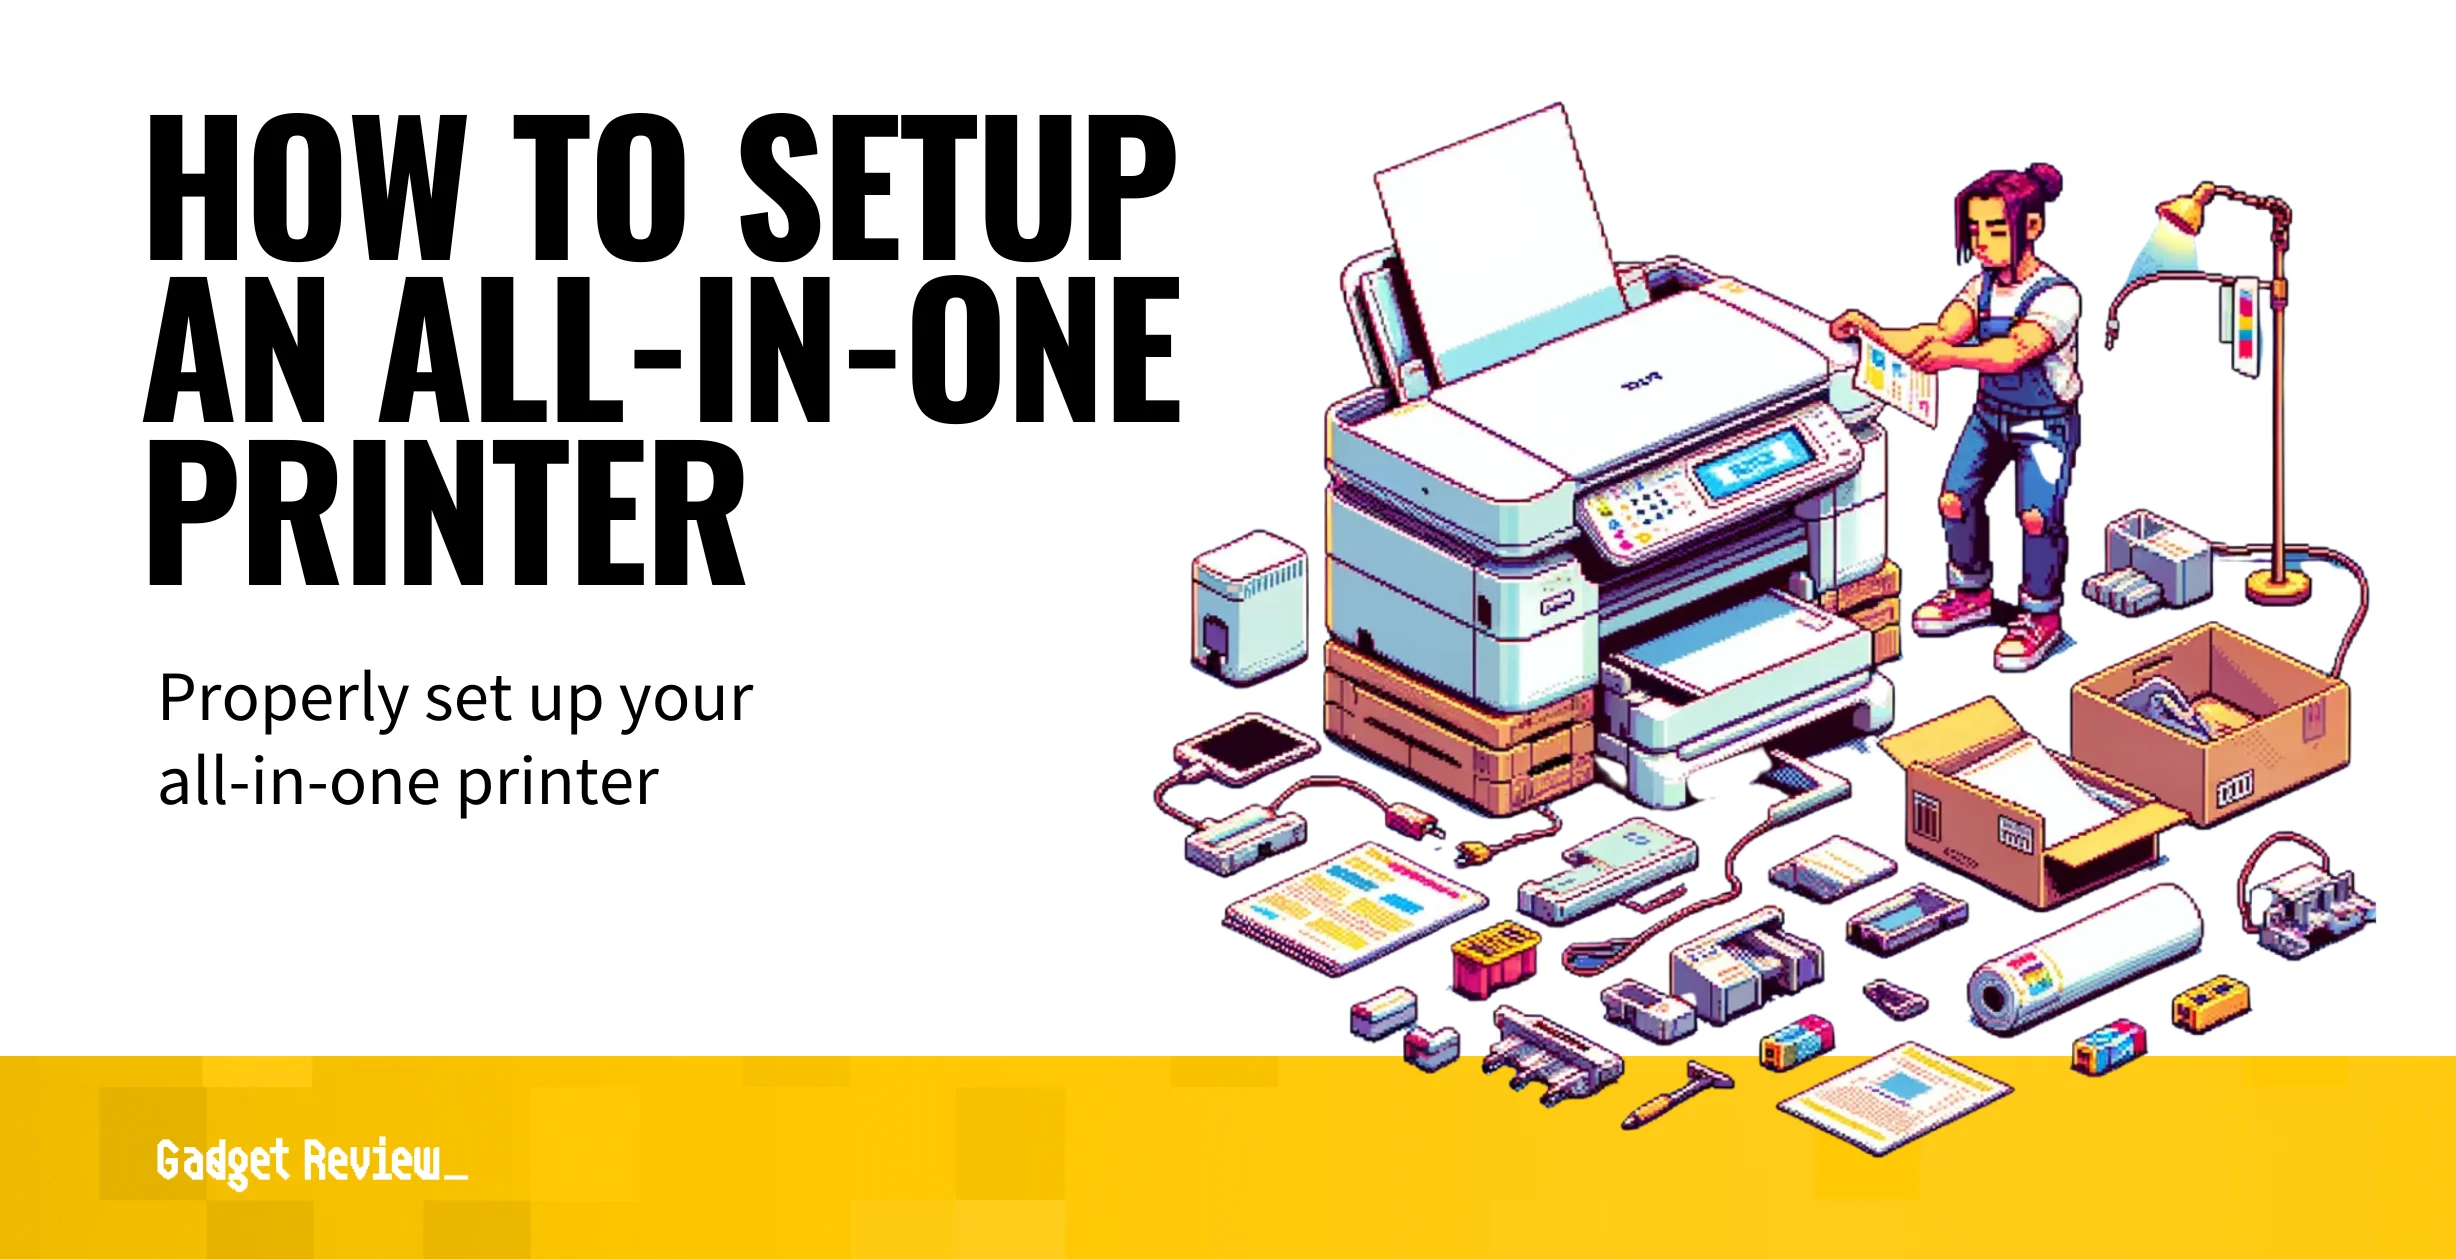 How to Setup an All-In-One Printer